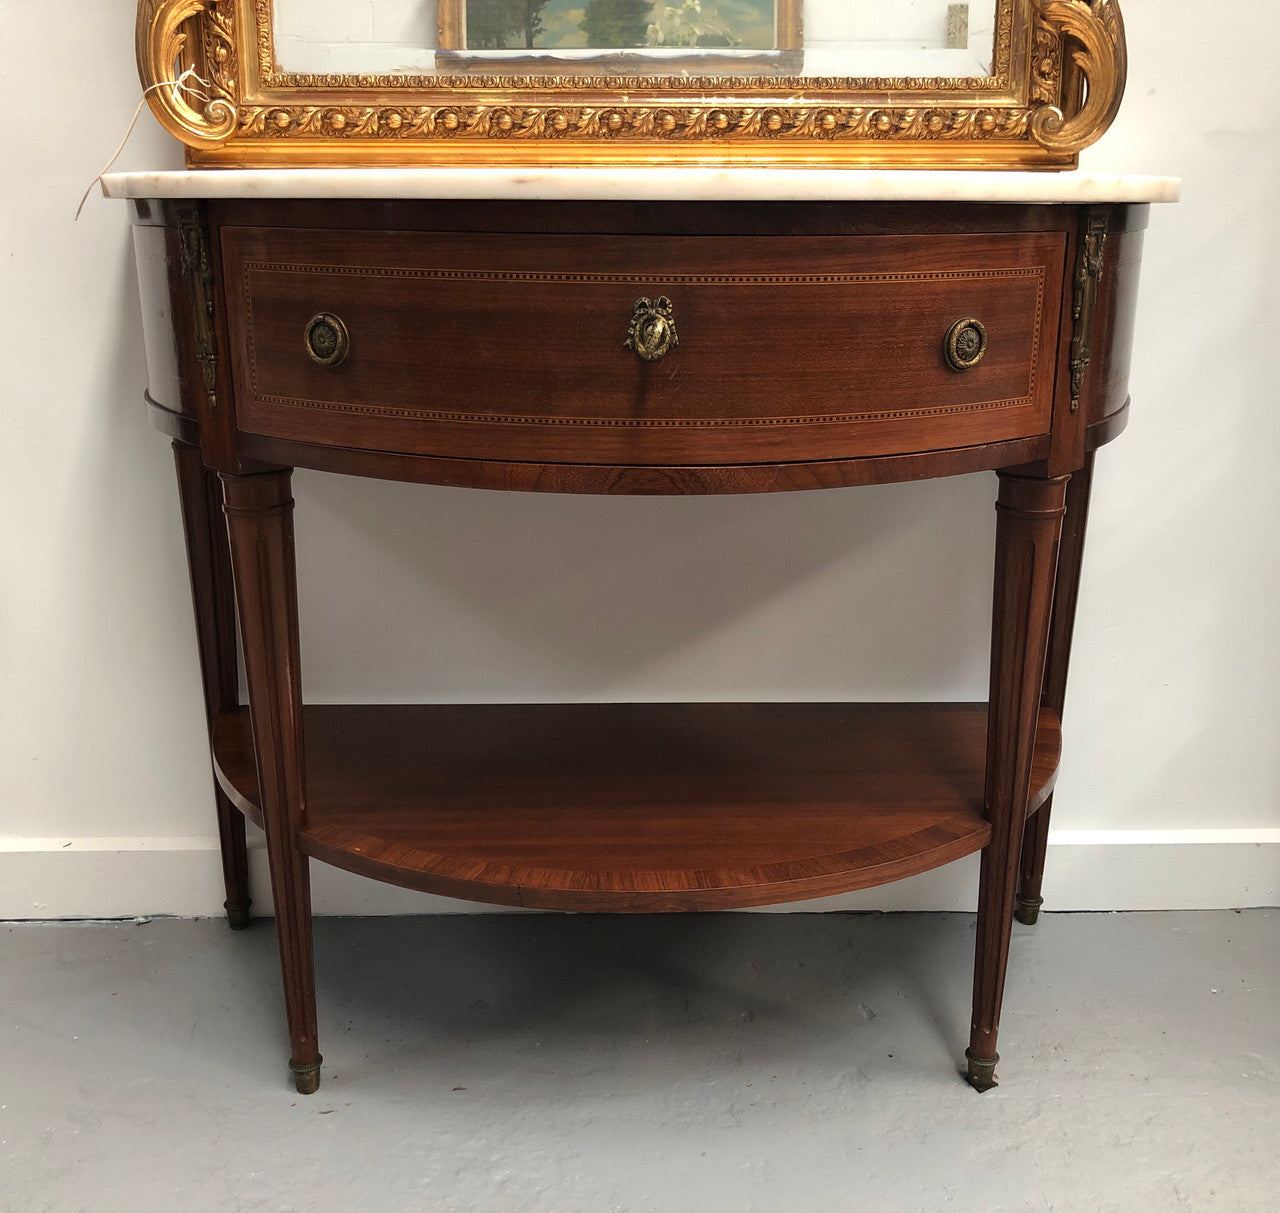 French marble top half round console table. It has beautiful marquetry inlay and ormolu mounts with a single drawer. In good original condition.